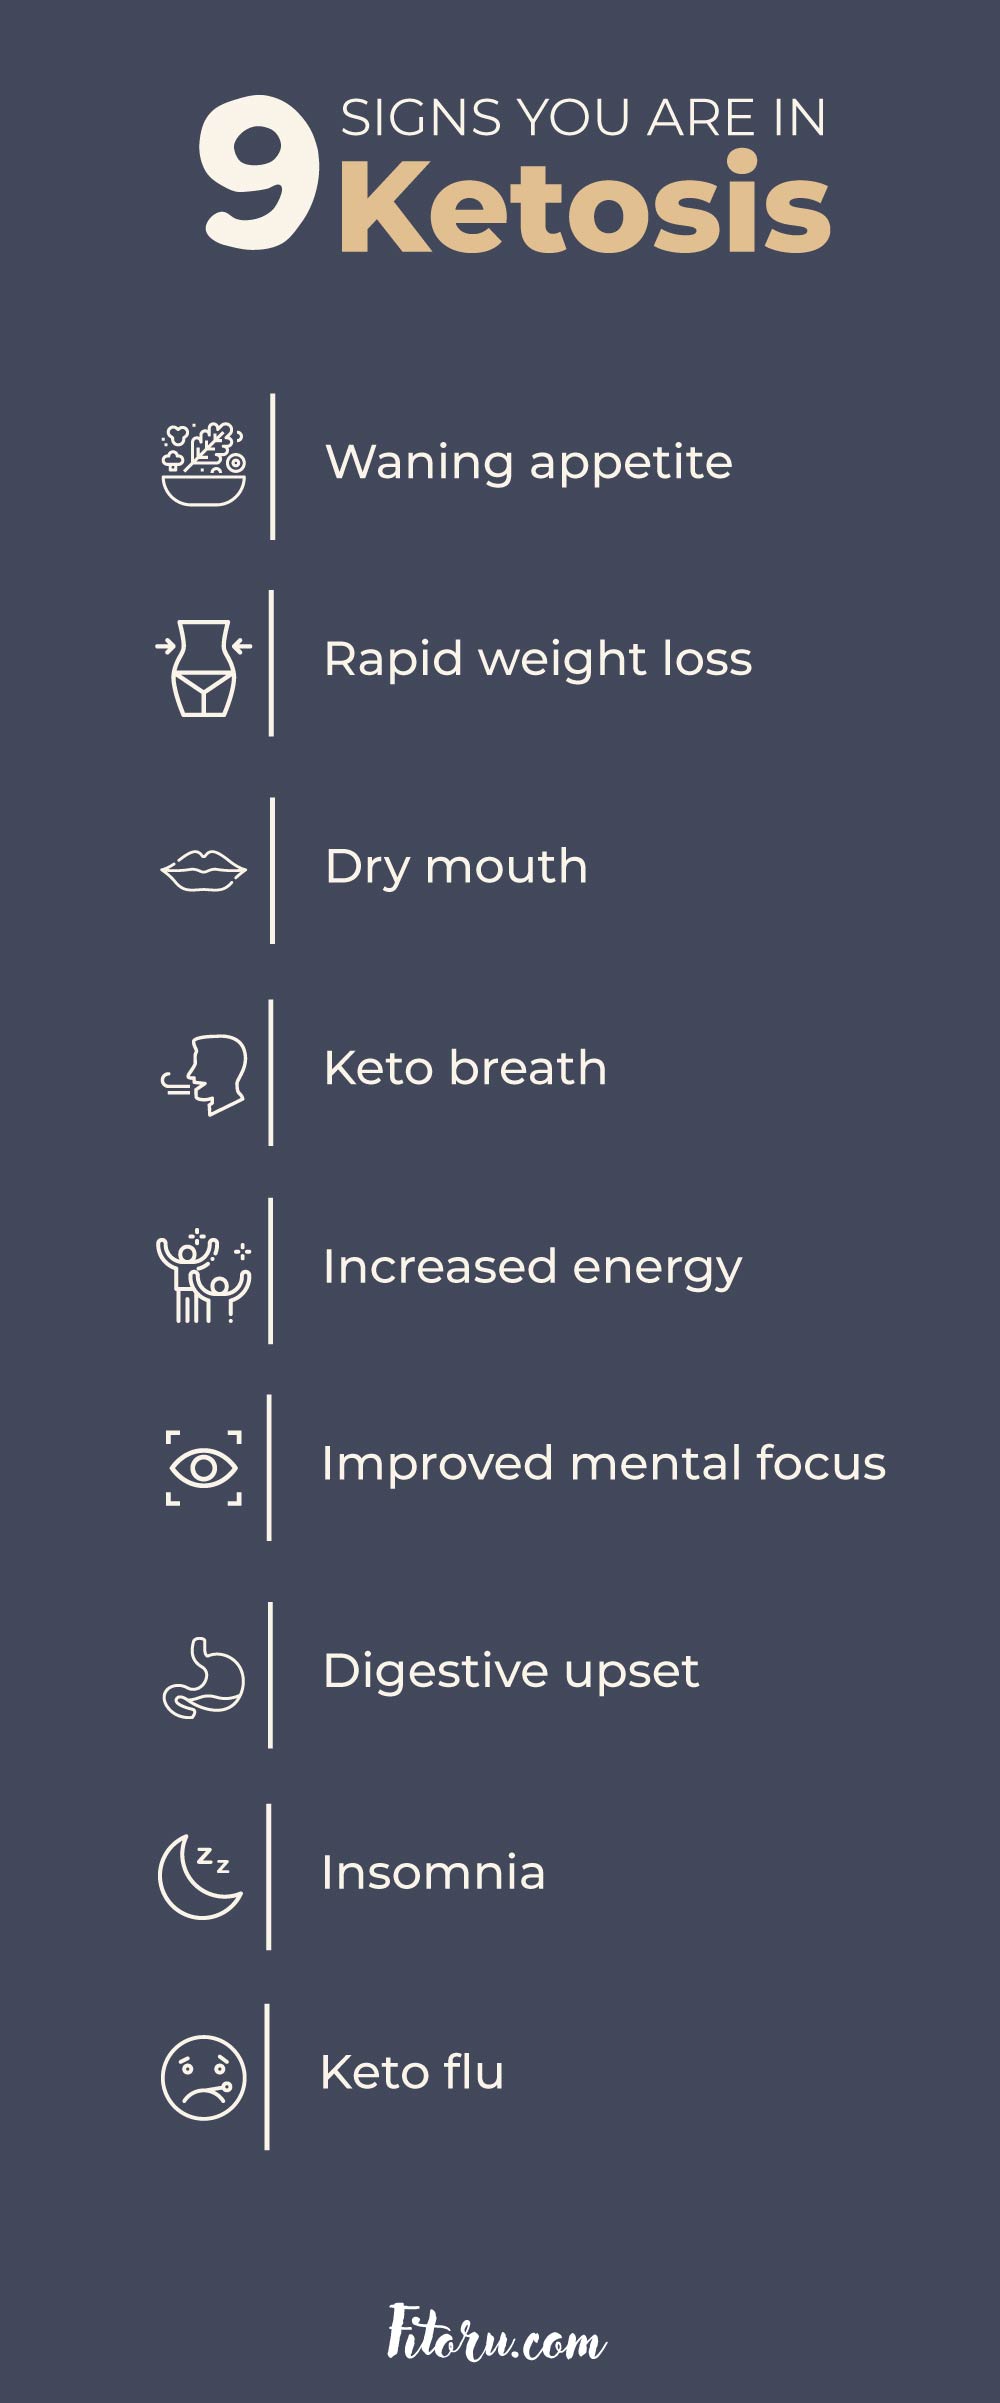 Here are 9 signs that you are in ketosis.